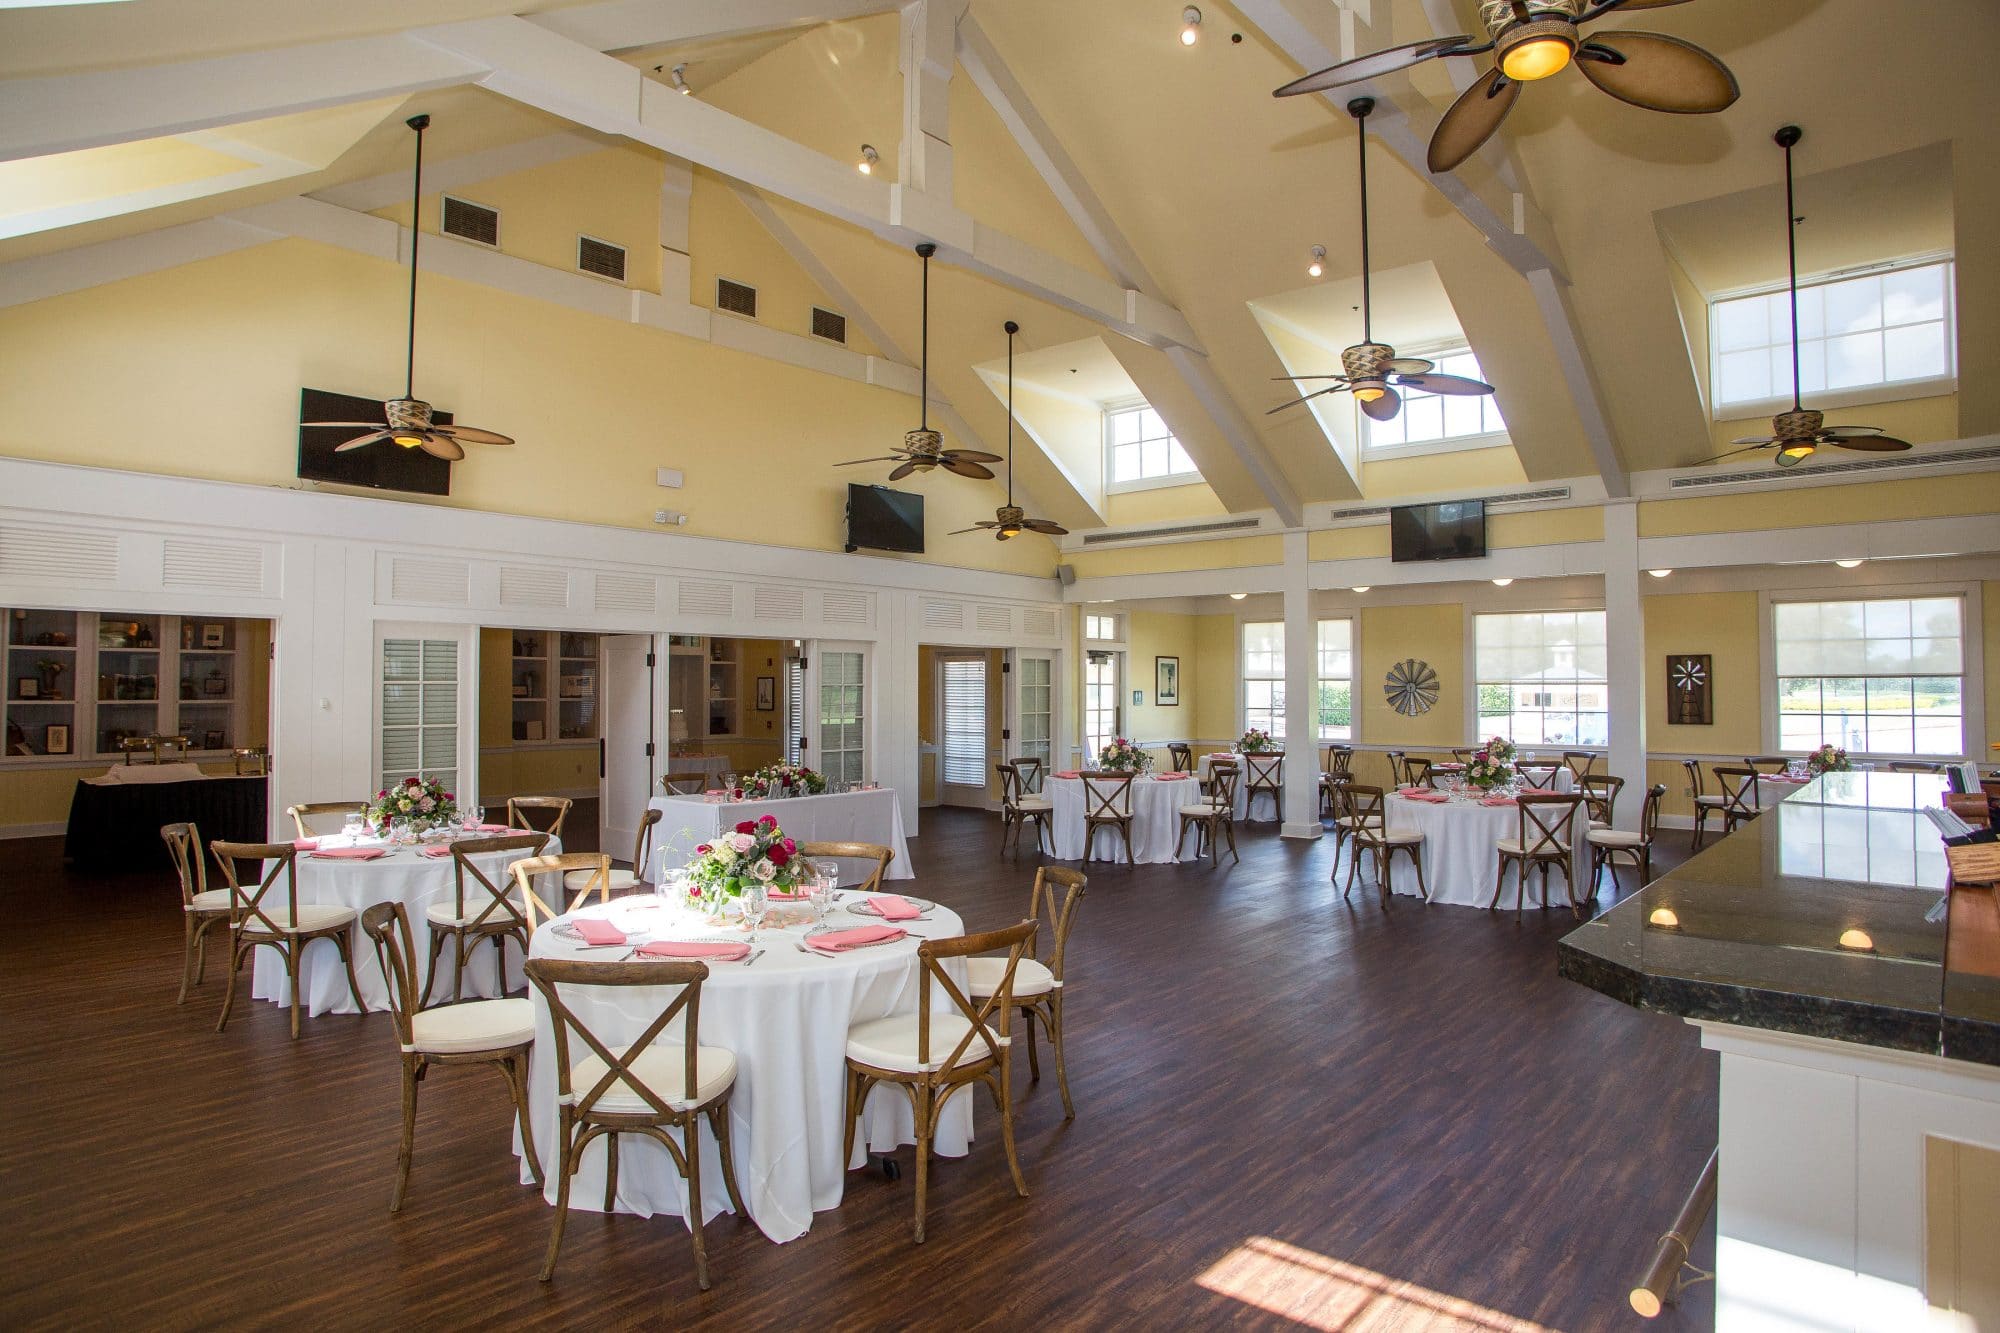 Celebration Golf Club - large open reception hall with vaulted ceilings